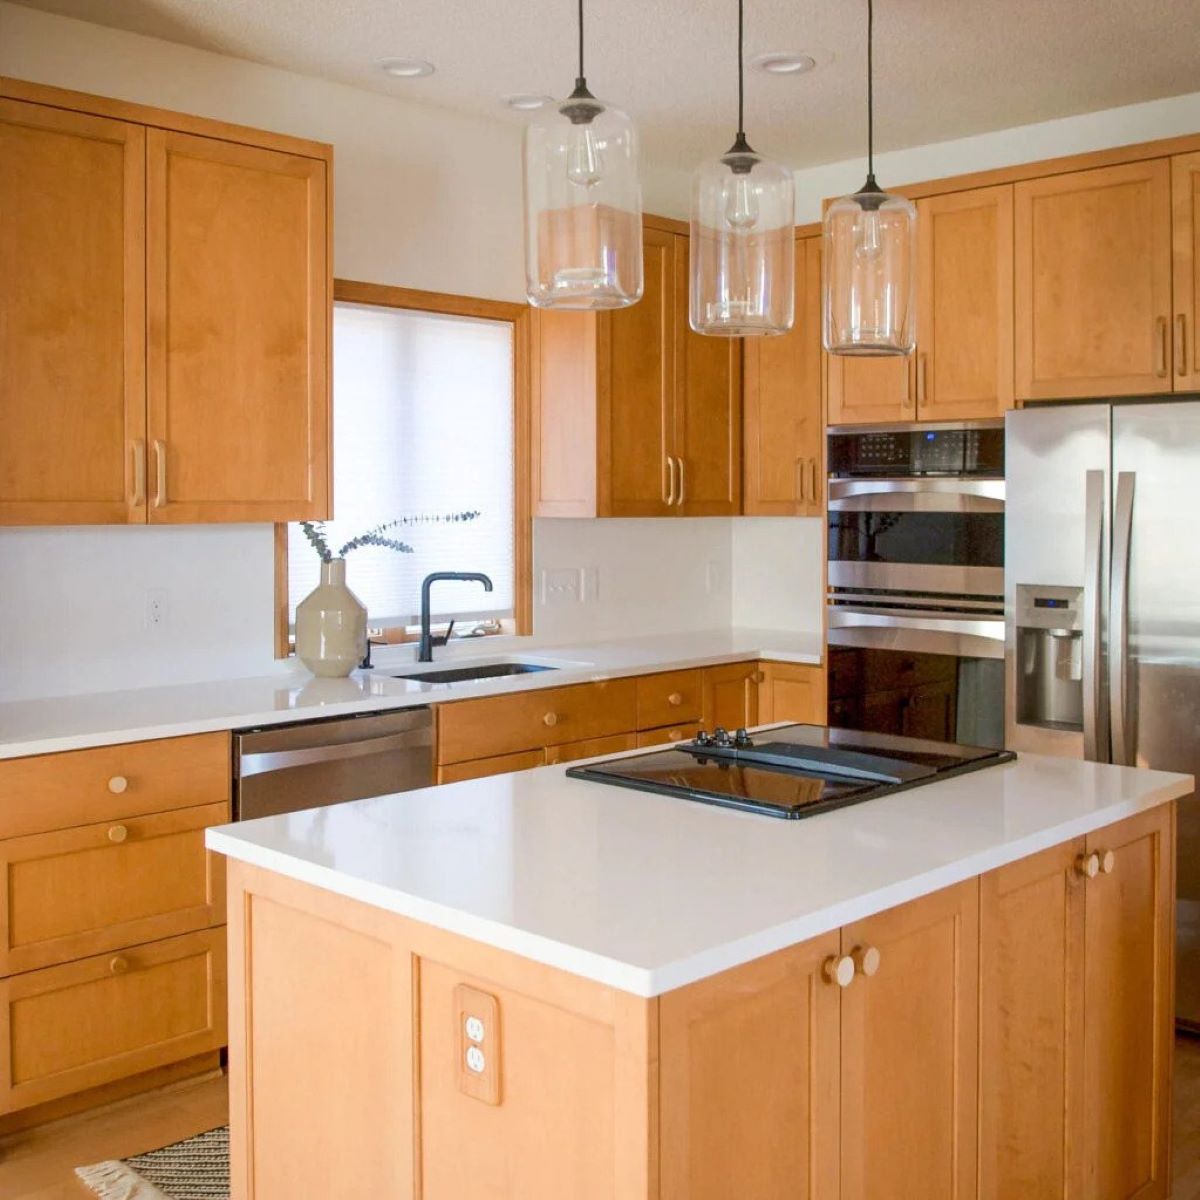 What Color Of Countertops Go With Light Wood Cabinets